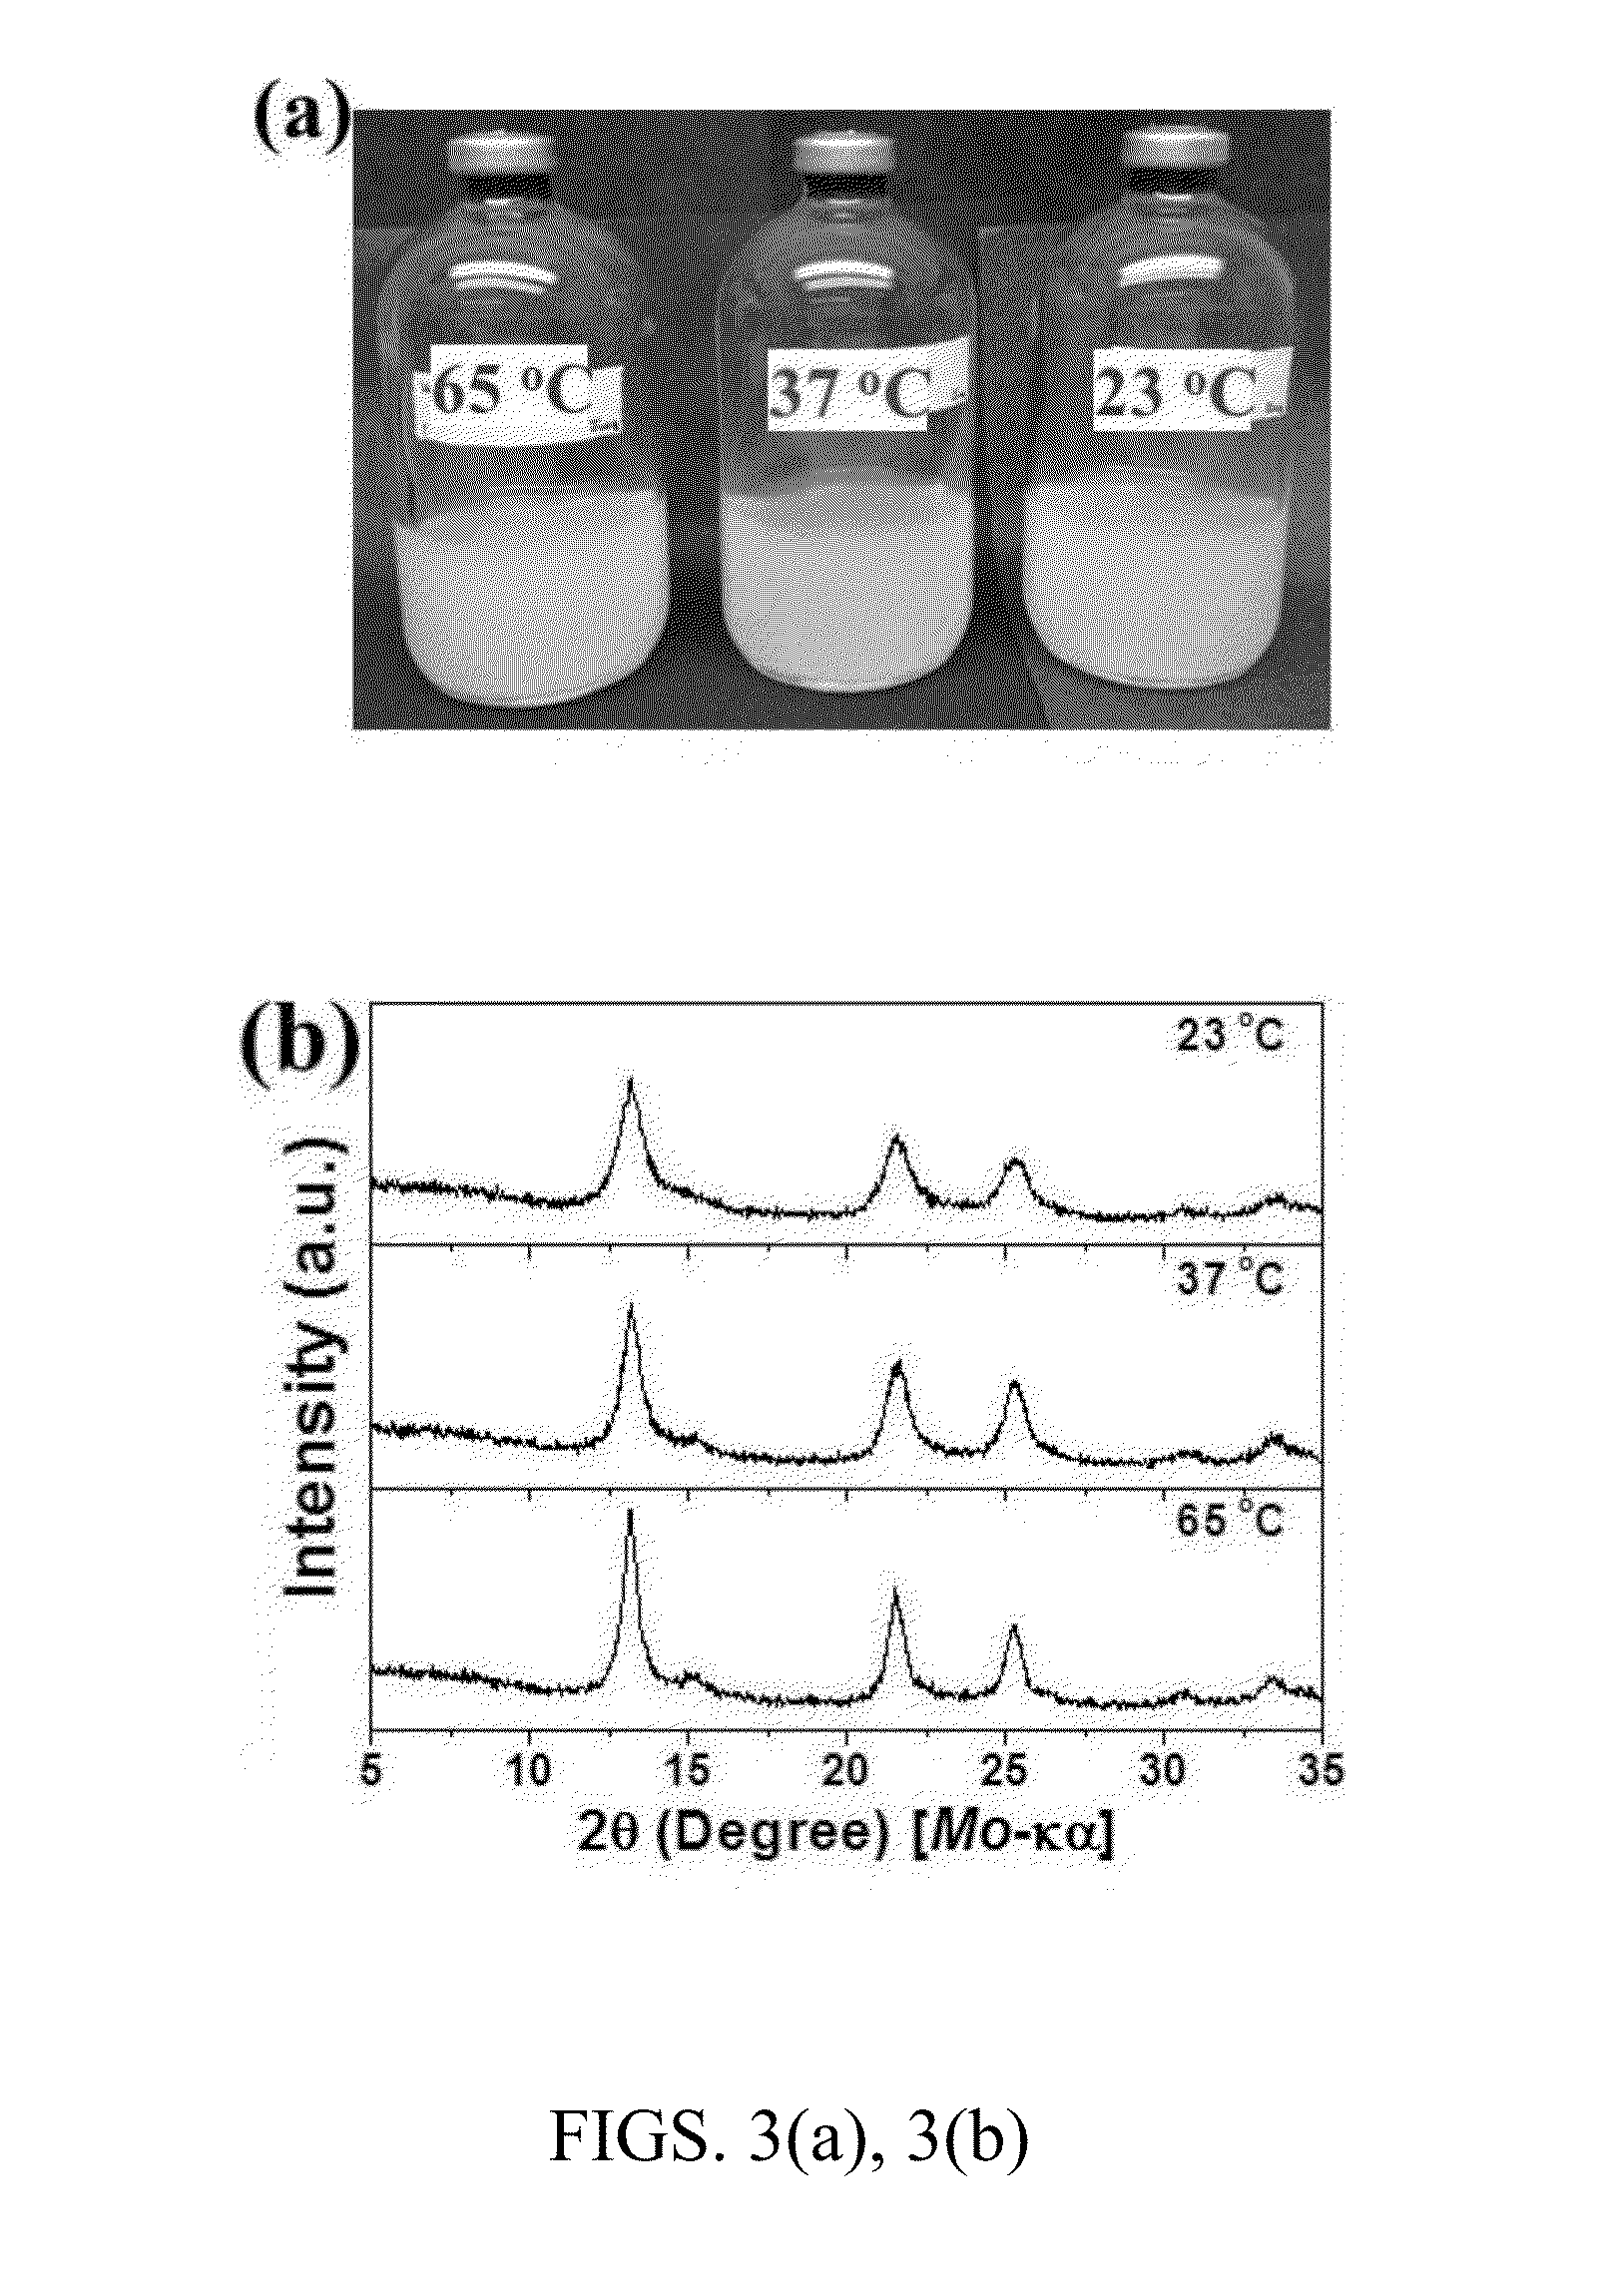 Controllable reductive method for synthesizing metal-containing particles